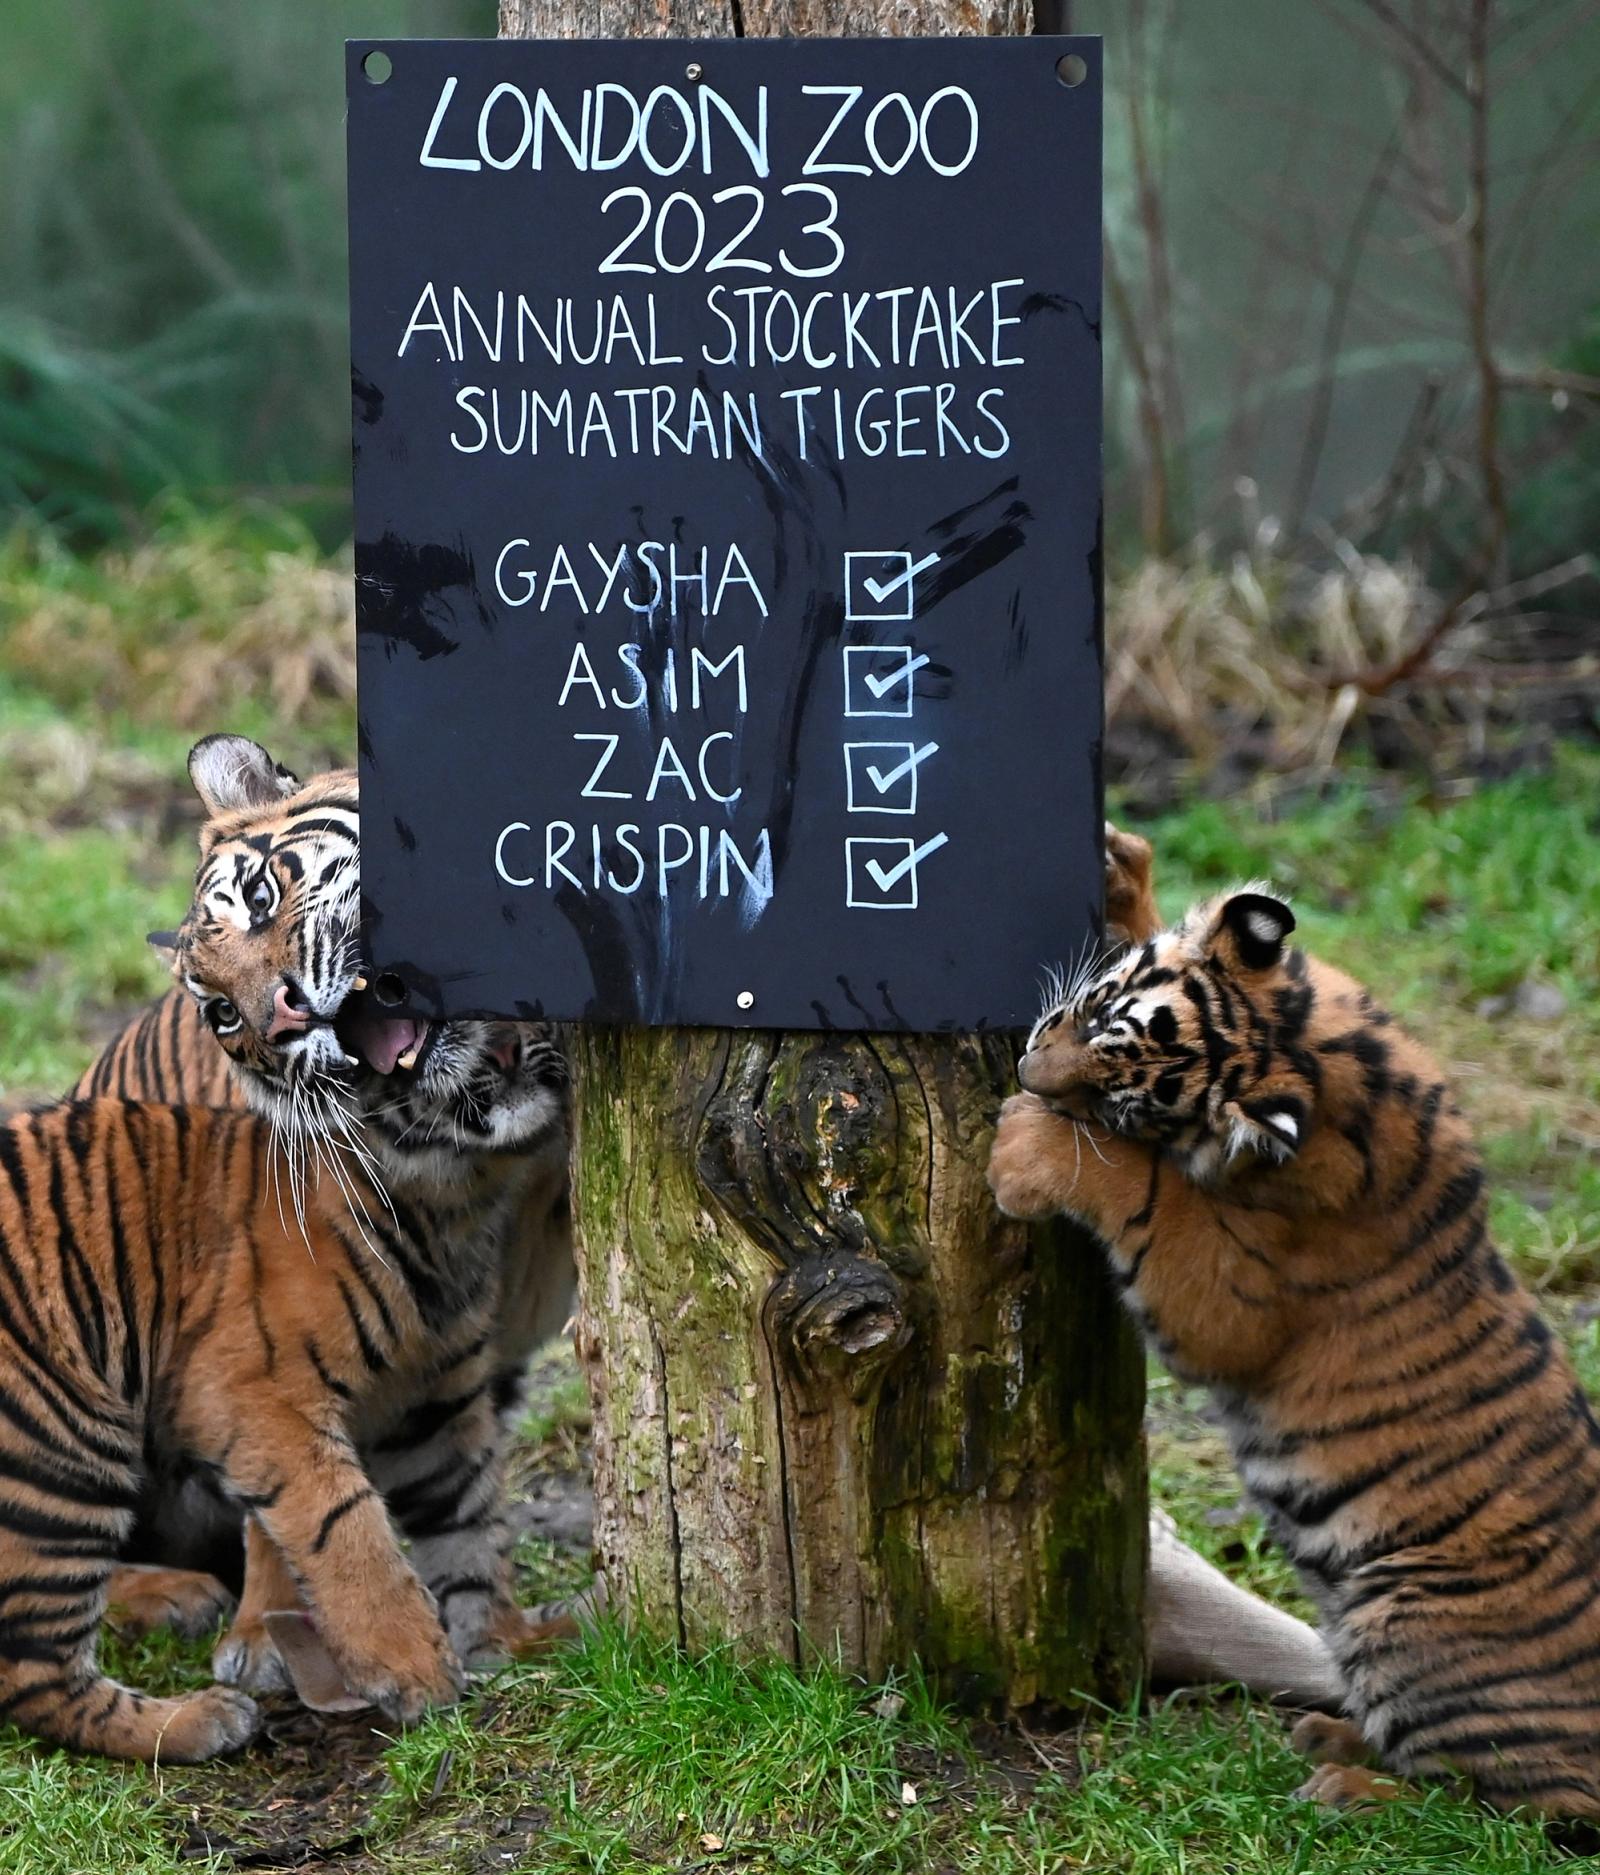 Sumatran tiger cubs play around a chalkboard placed during the annual stocktake at ZSL London Zoo in London, Britain.